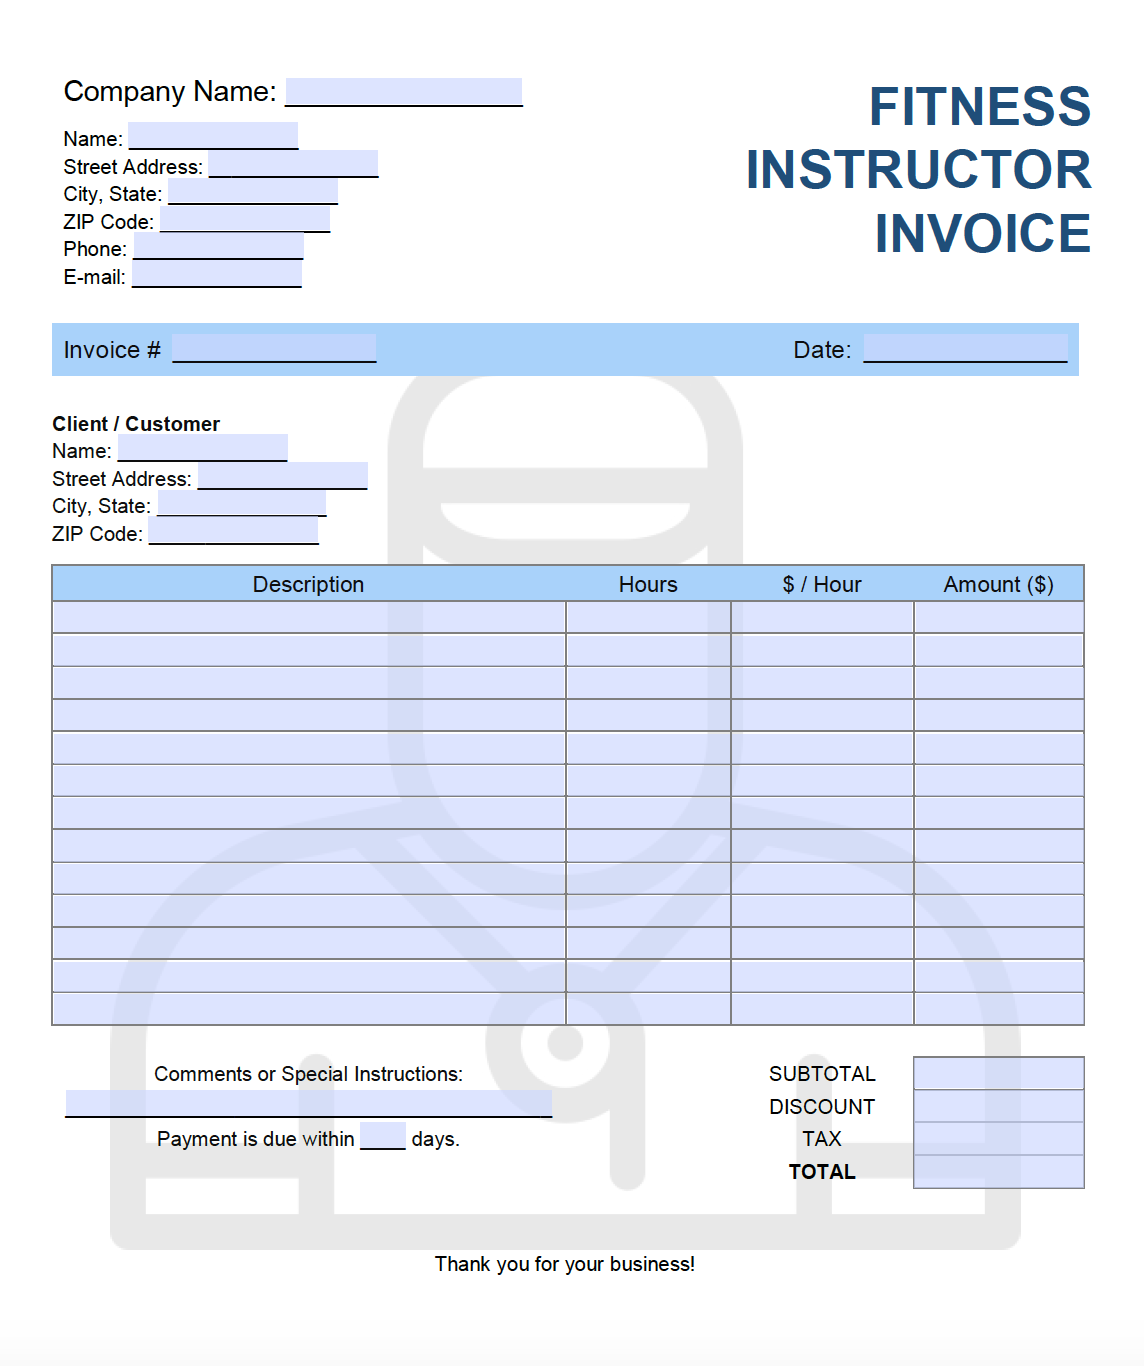 Free Fitness Instructor Invoice Template  PDF  WORD  EXCEL